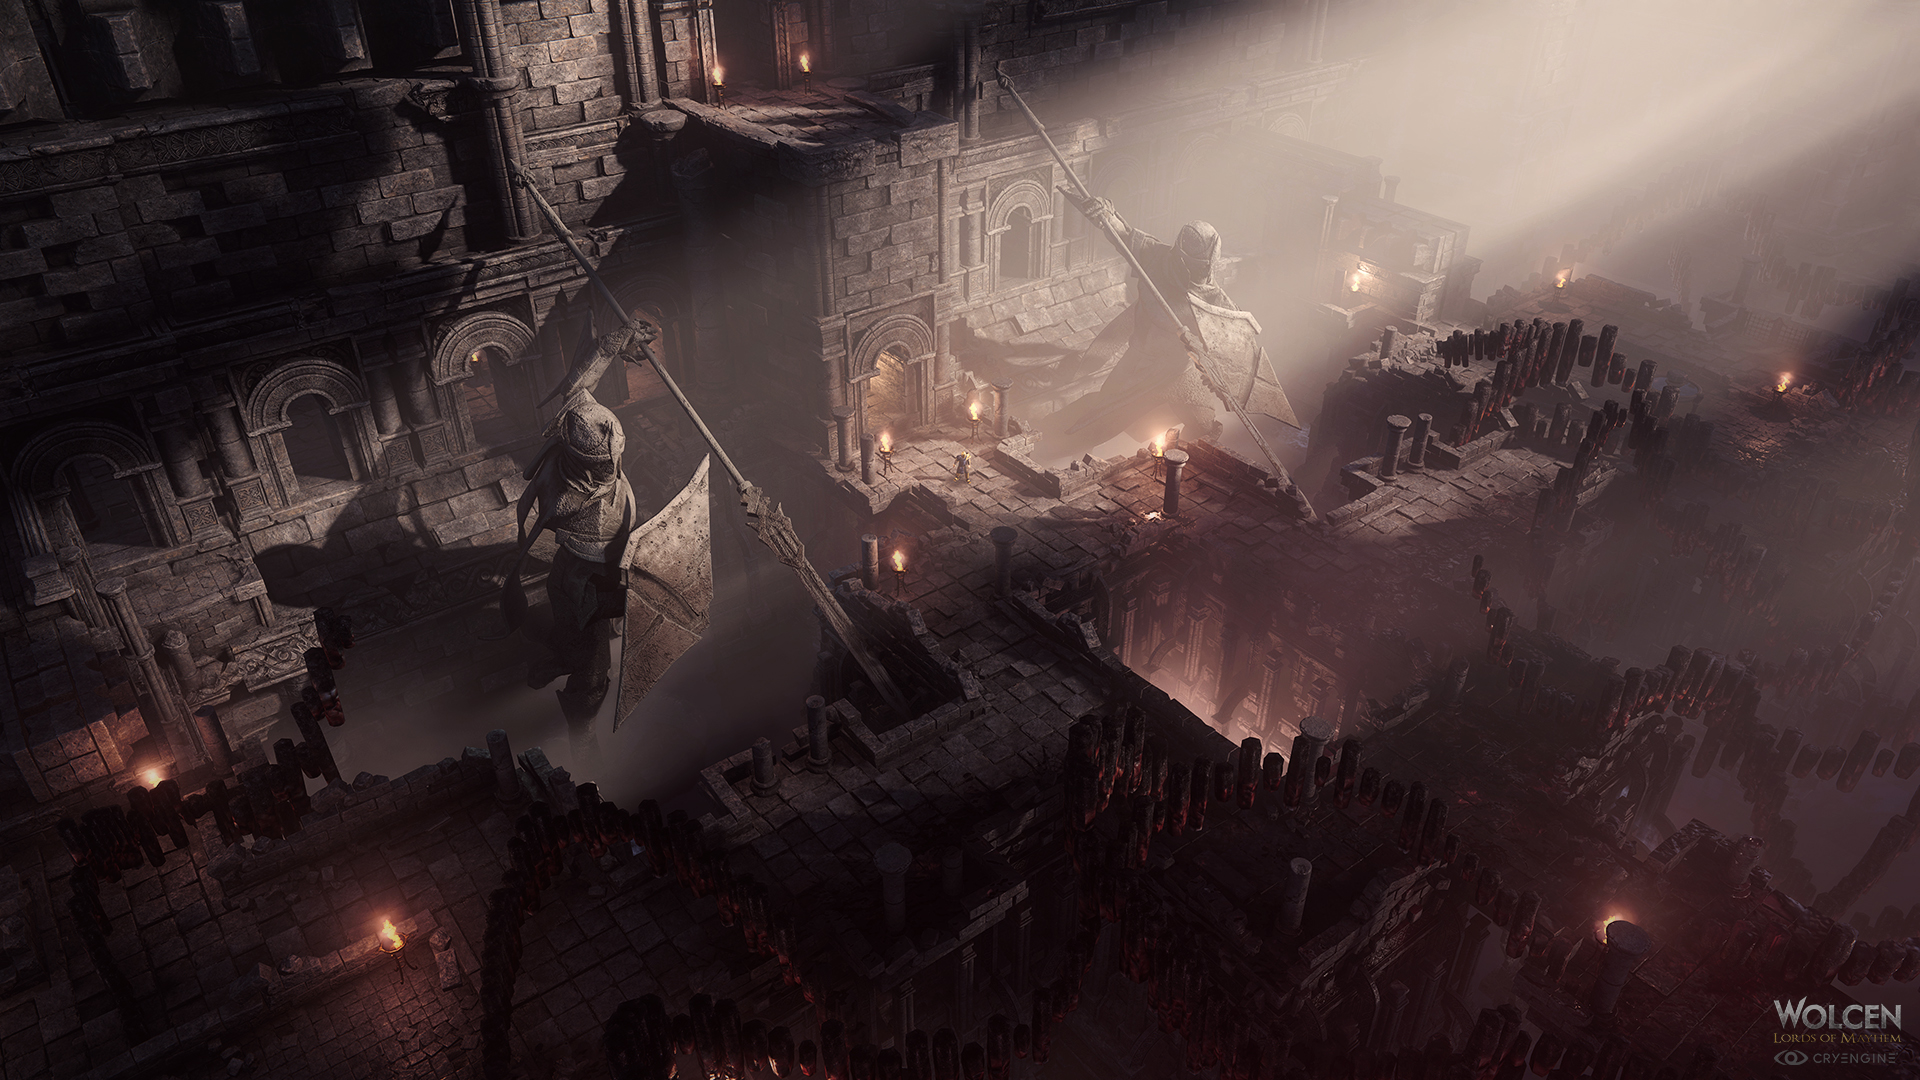 download the new Wolcen: Lords of Mayhem